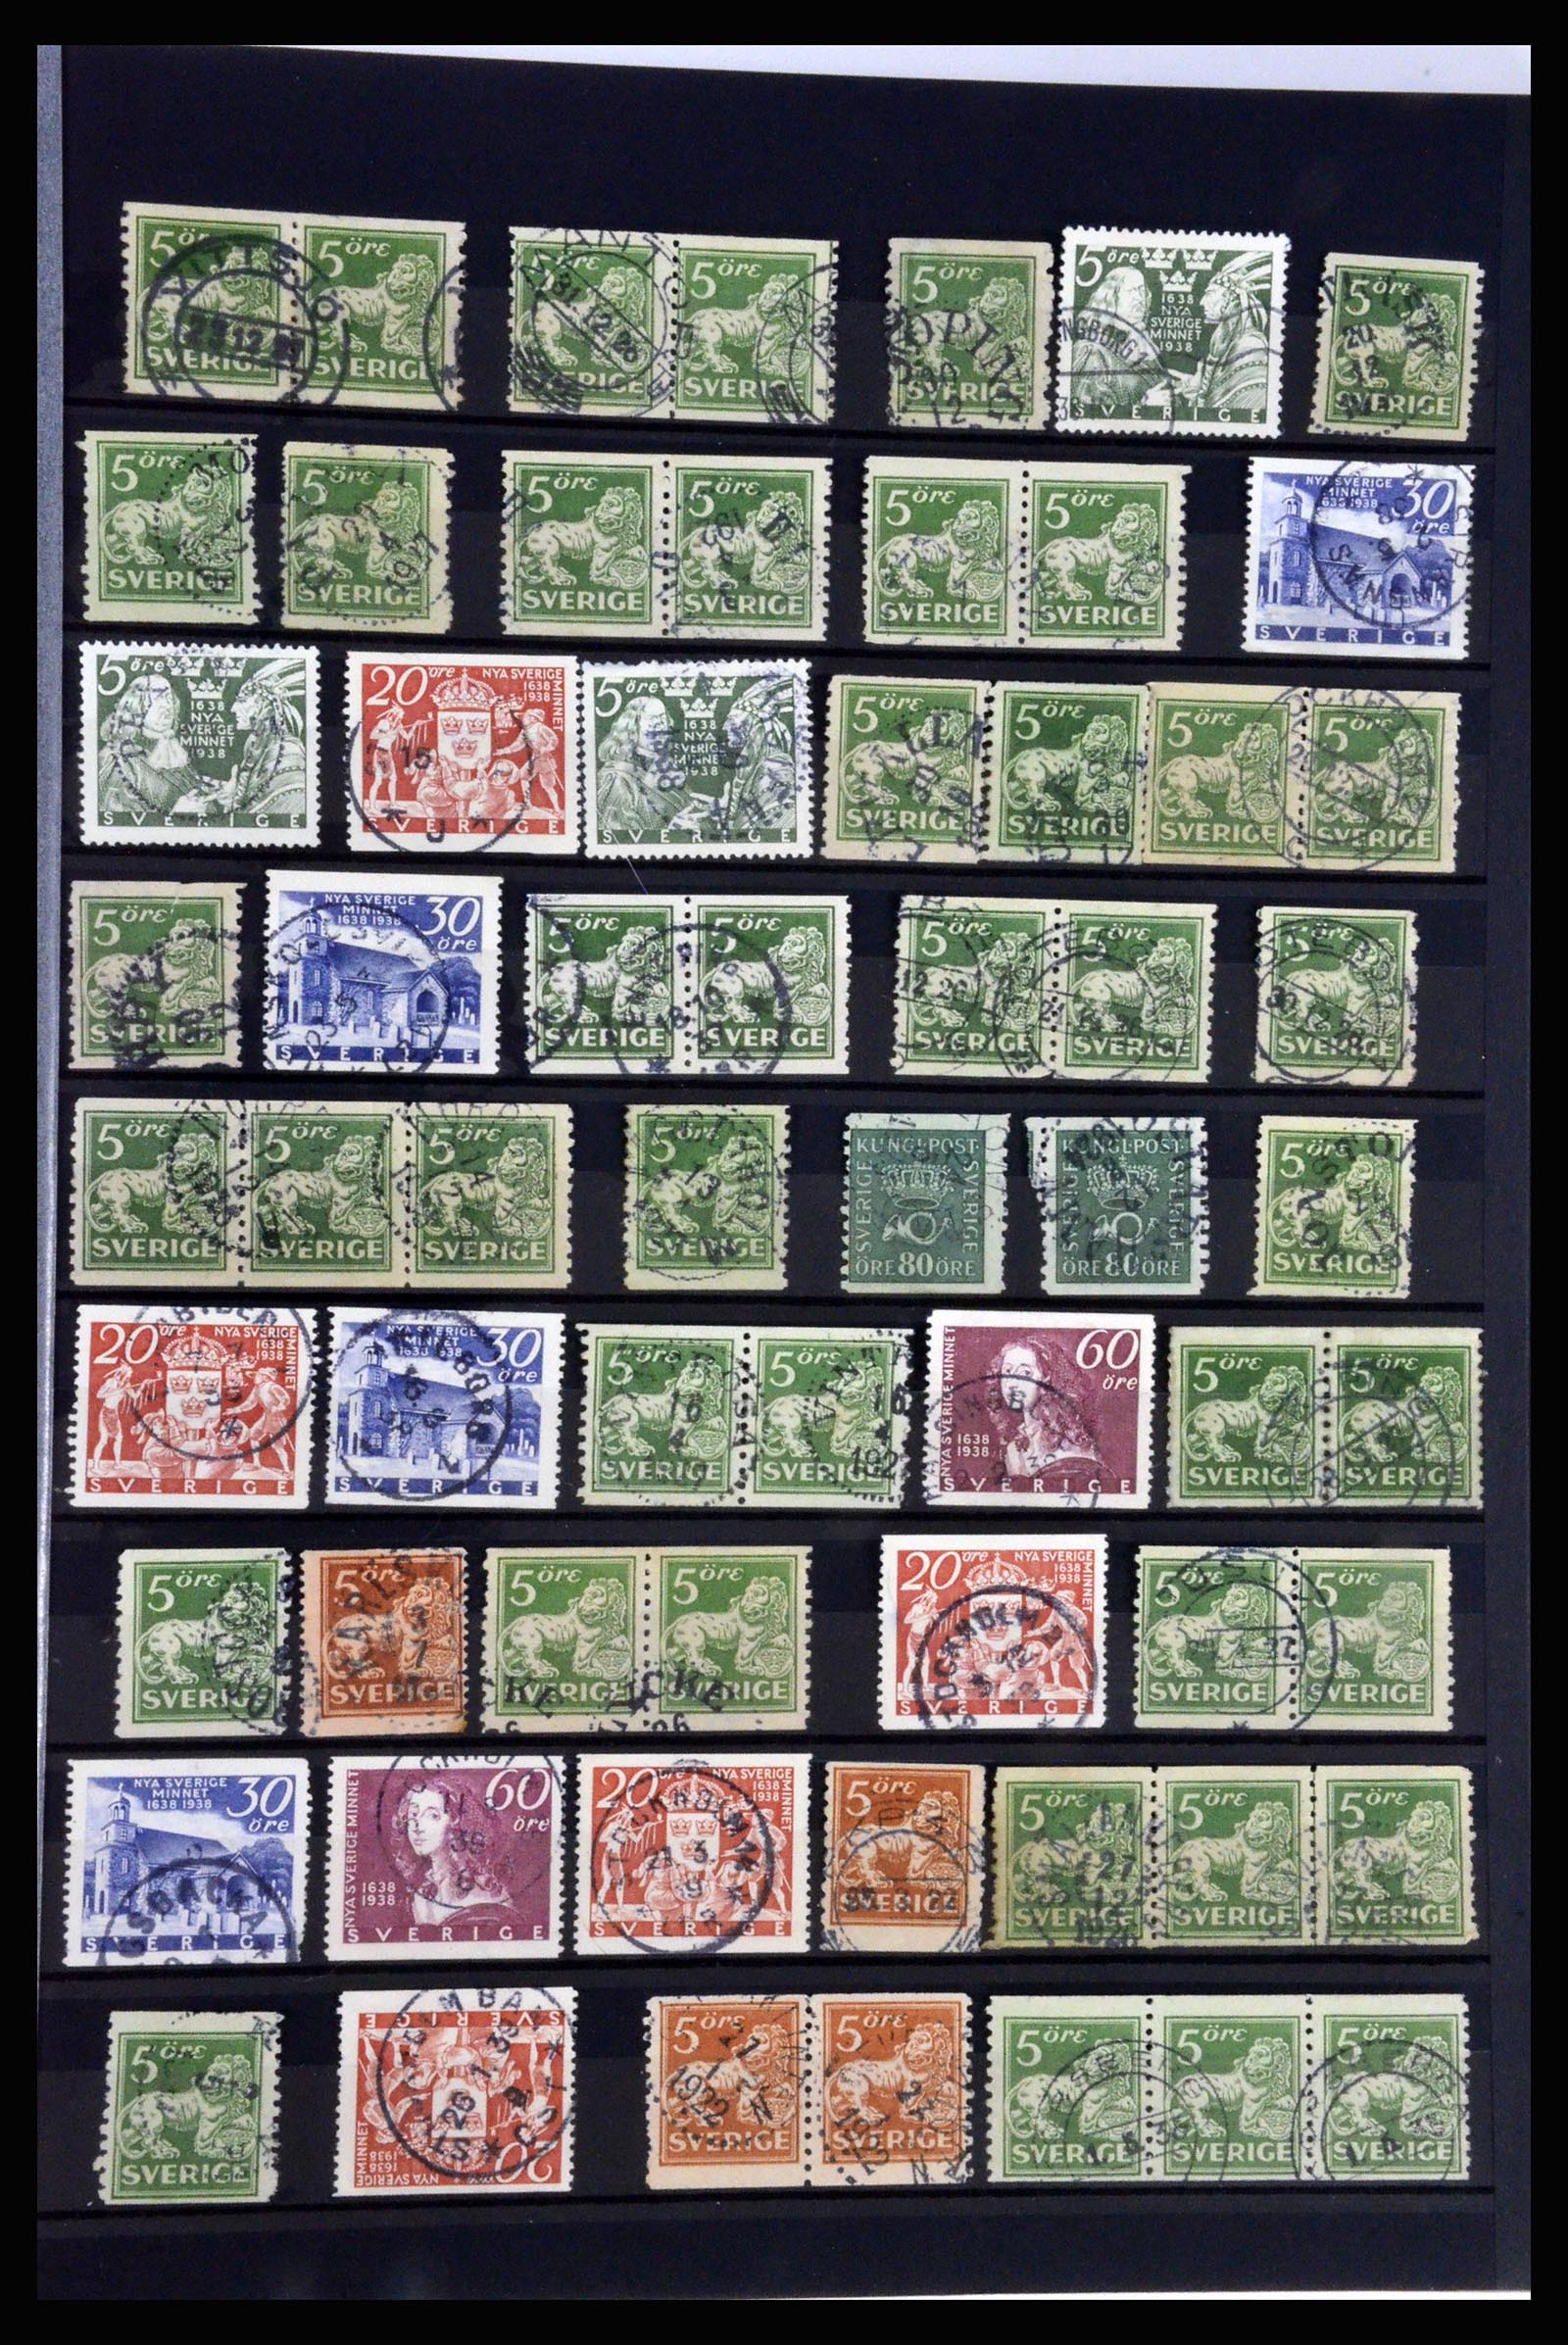 36316 031 - Stamp collection 36316 Sweden cancellations 1920-1938.